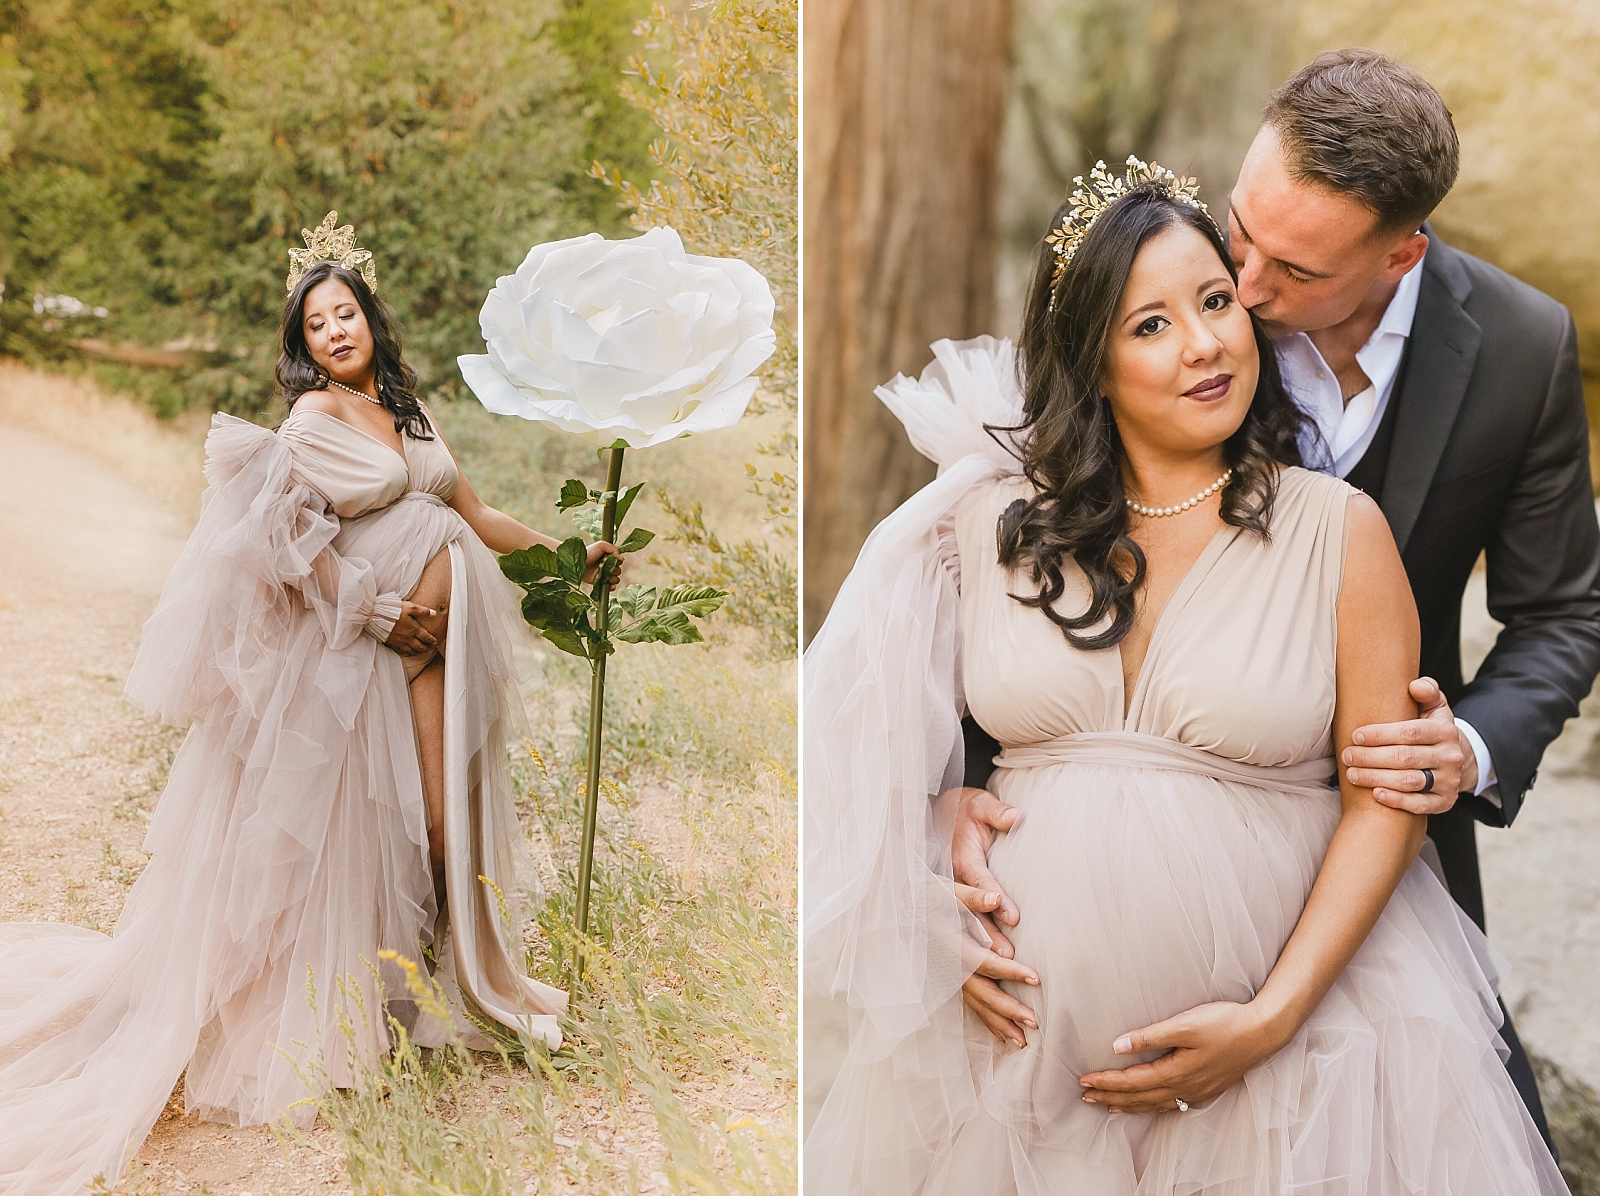 Fantasy maternity photos with crown 